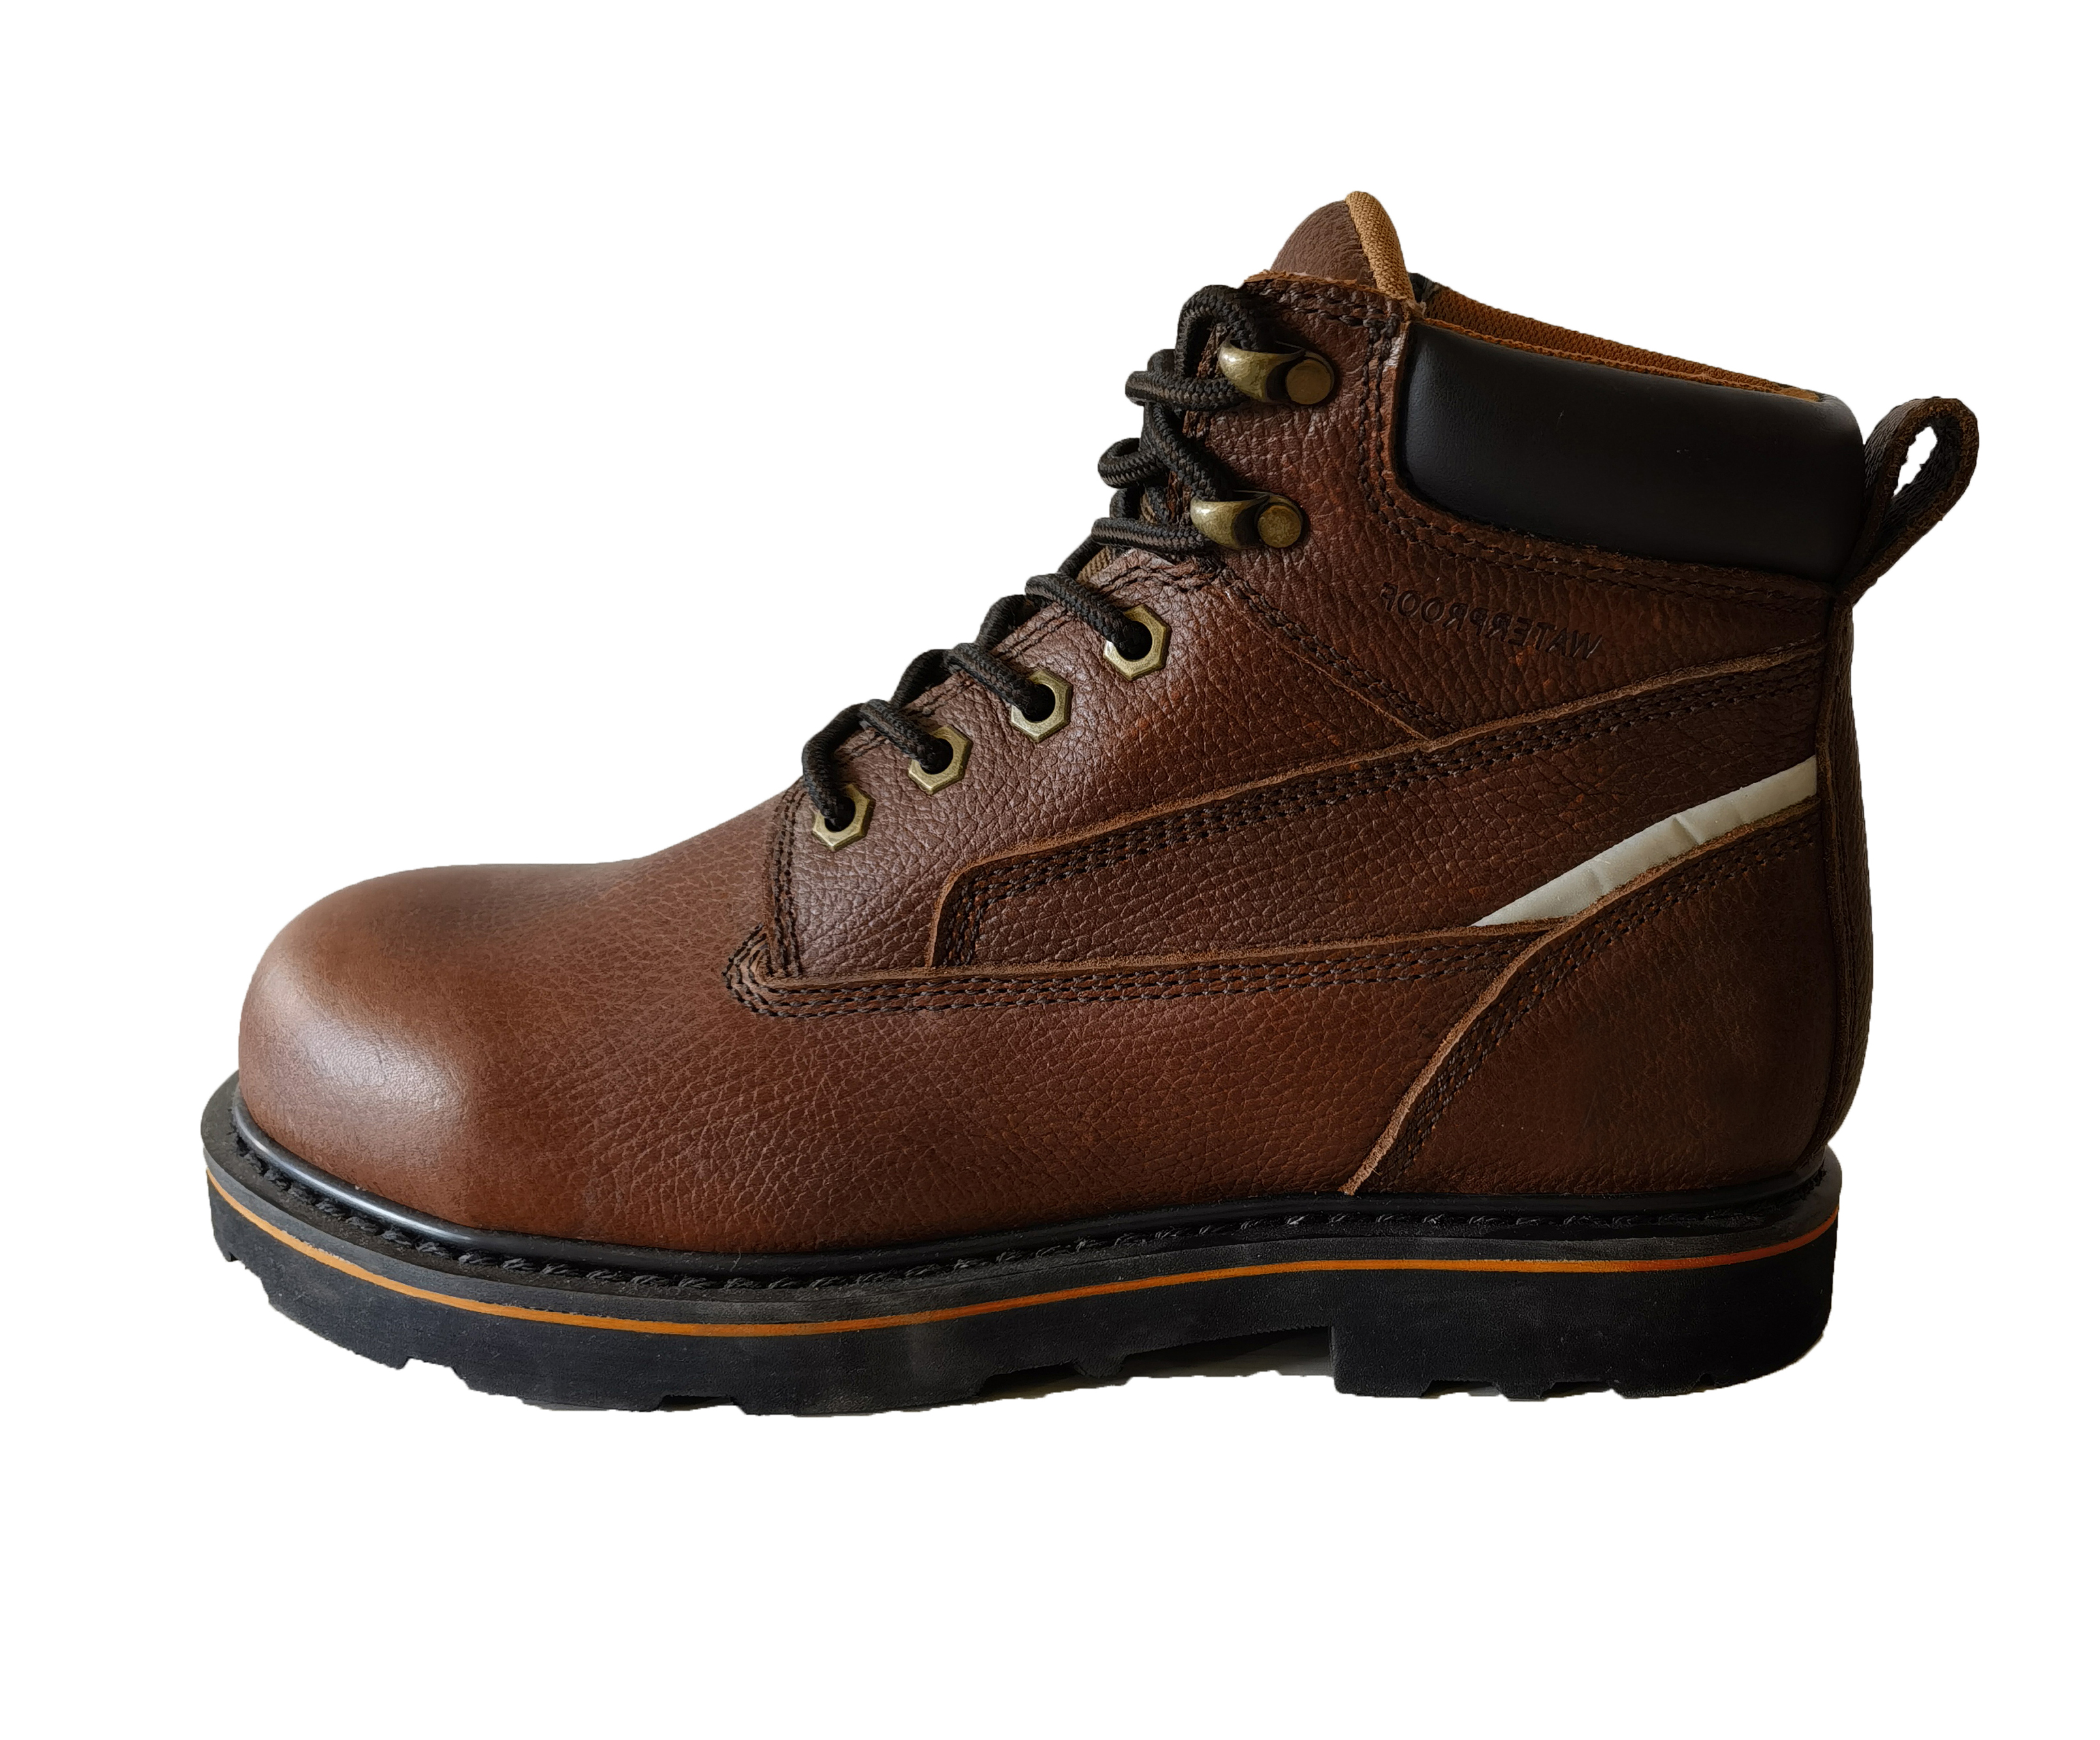 New Line of Acid-Resistant Shoes Now Available for Oil Industry Workers